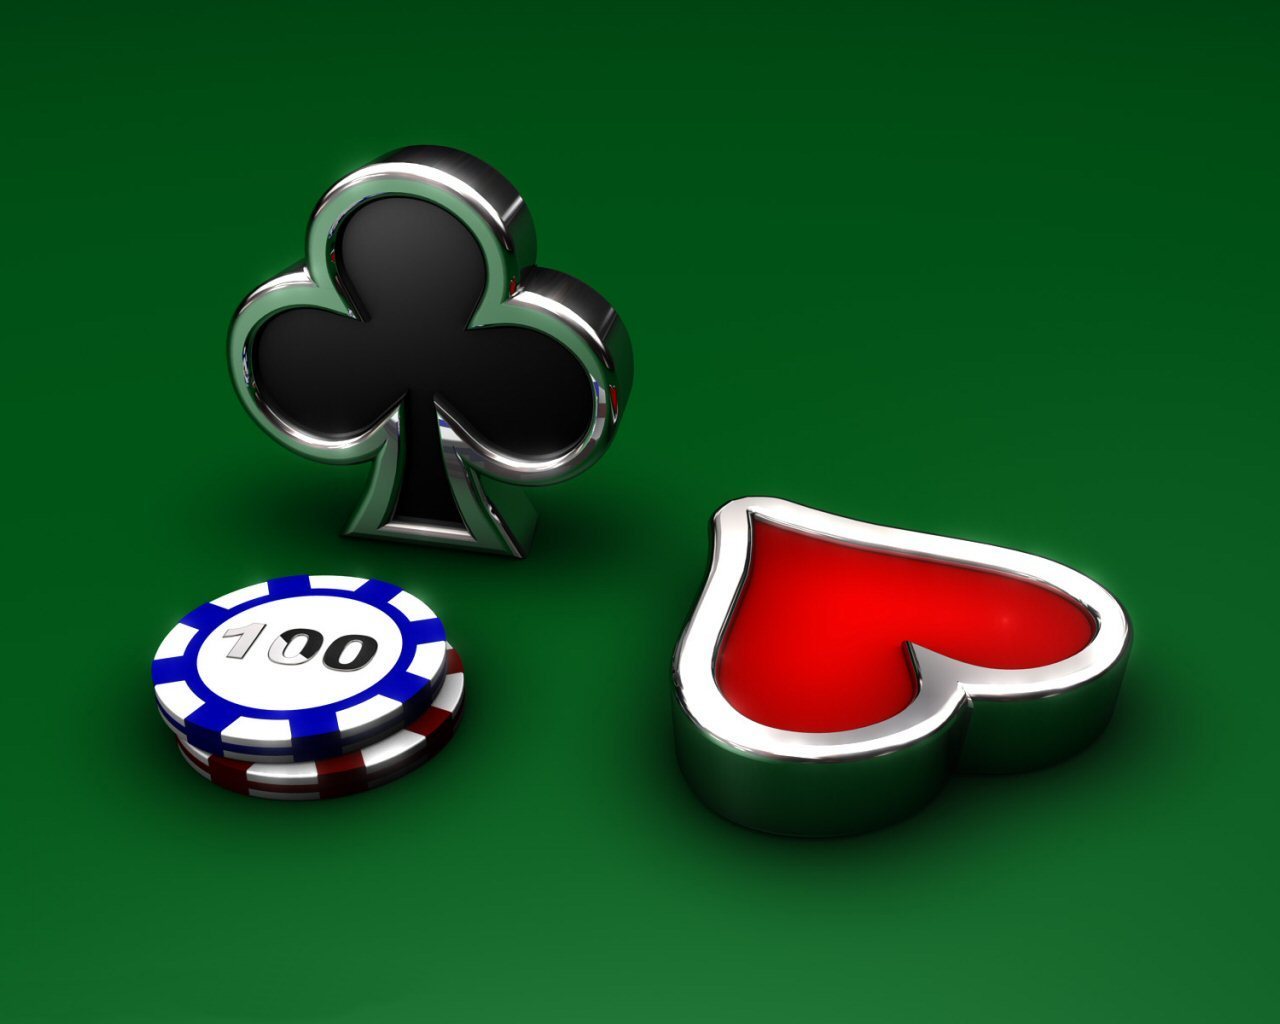 Poker Online: A Game of Skill and Chance